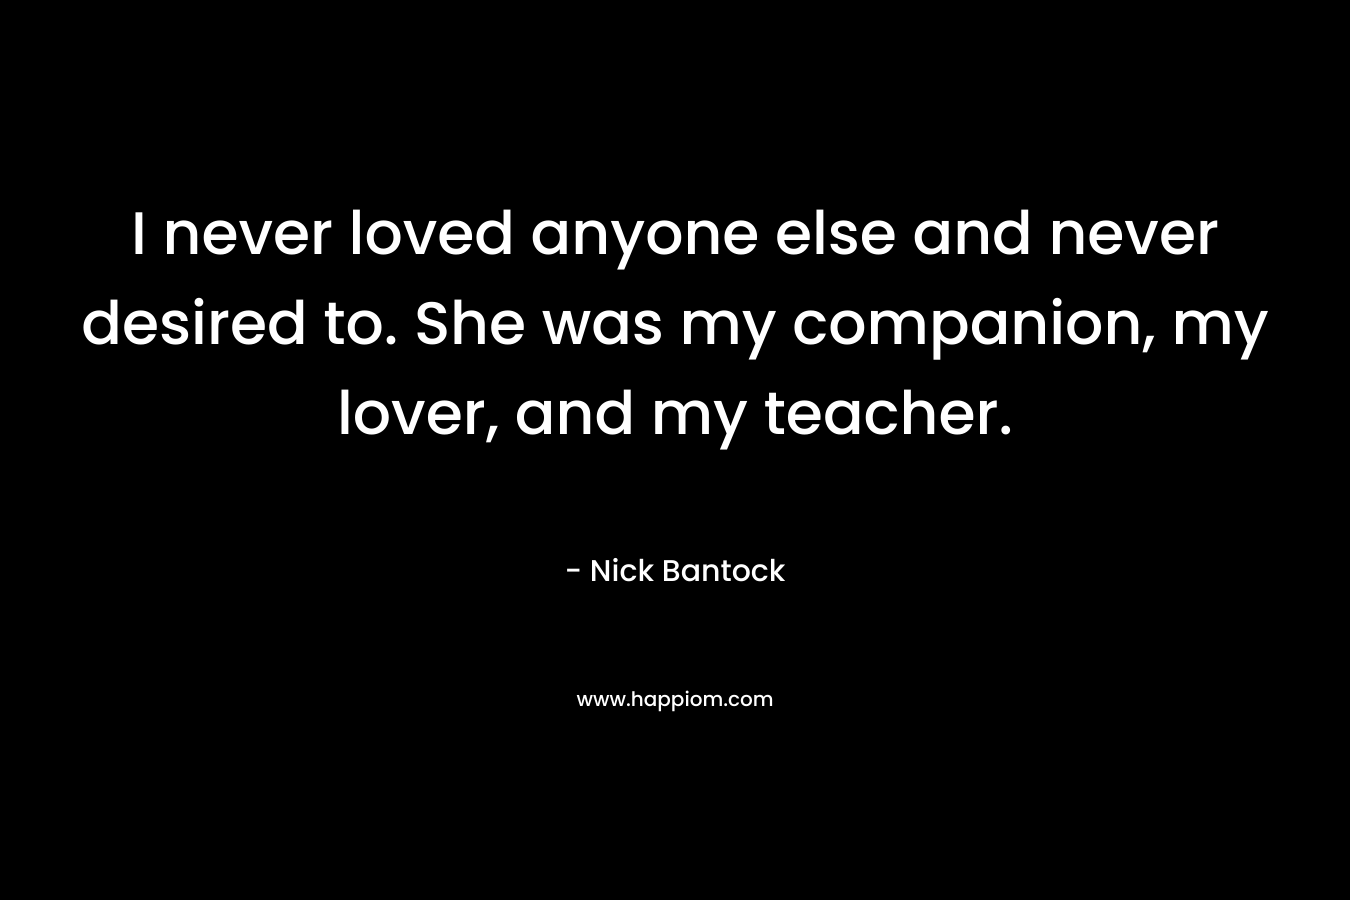 I never loved anyone else and never desired to. She was my companion, my lover, and my teacher. – Nick Bantock